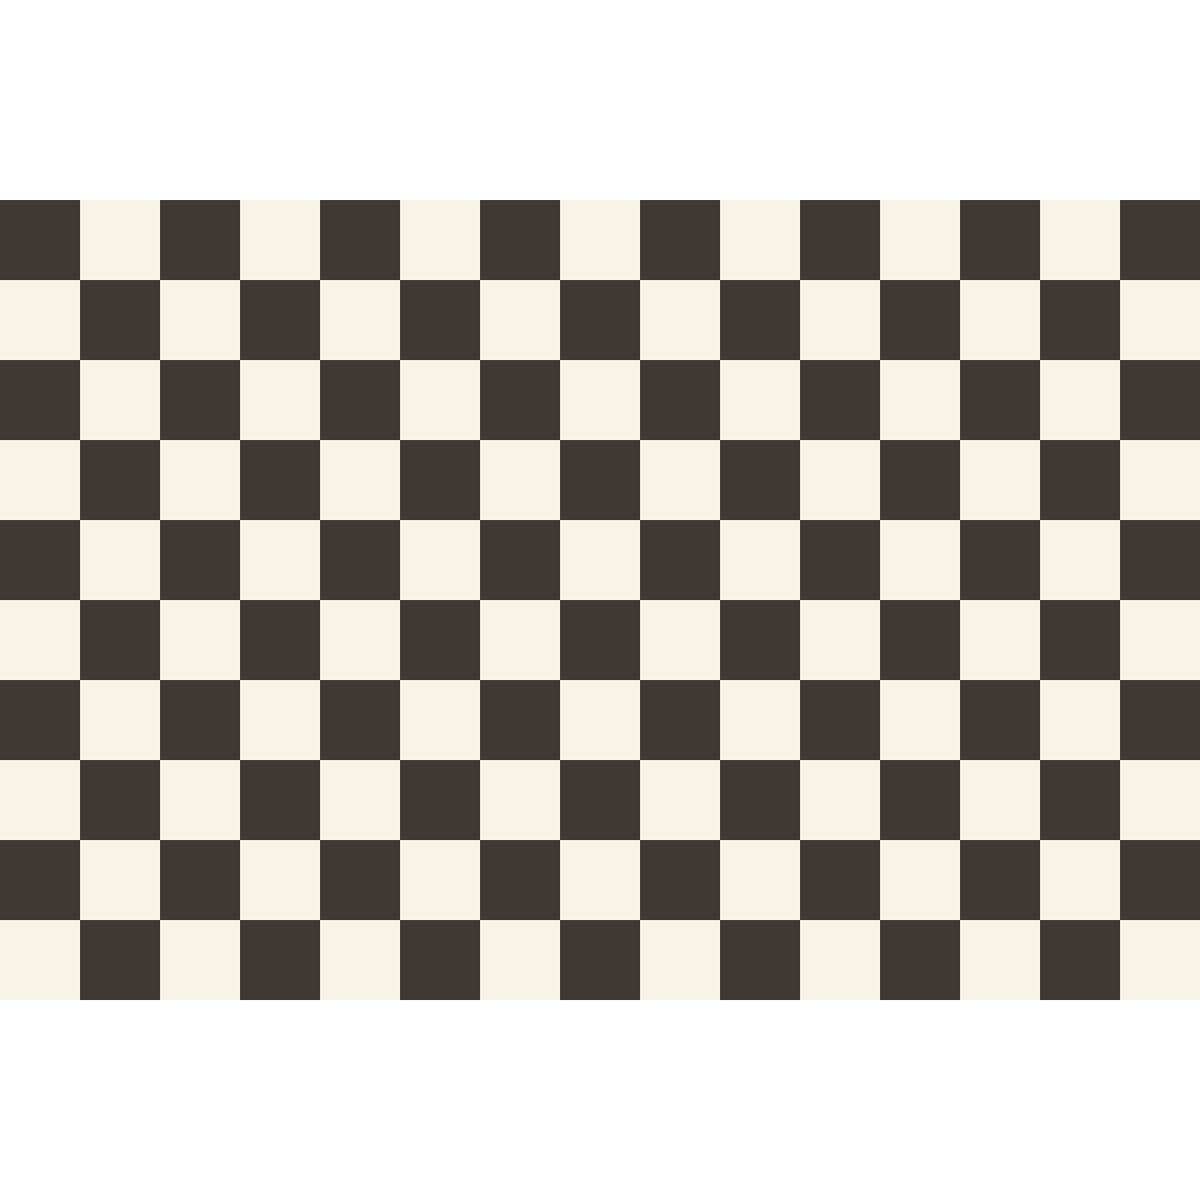 Tempaper's Checkmate Vinyl Rug in black and white. #color_domino